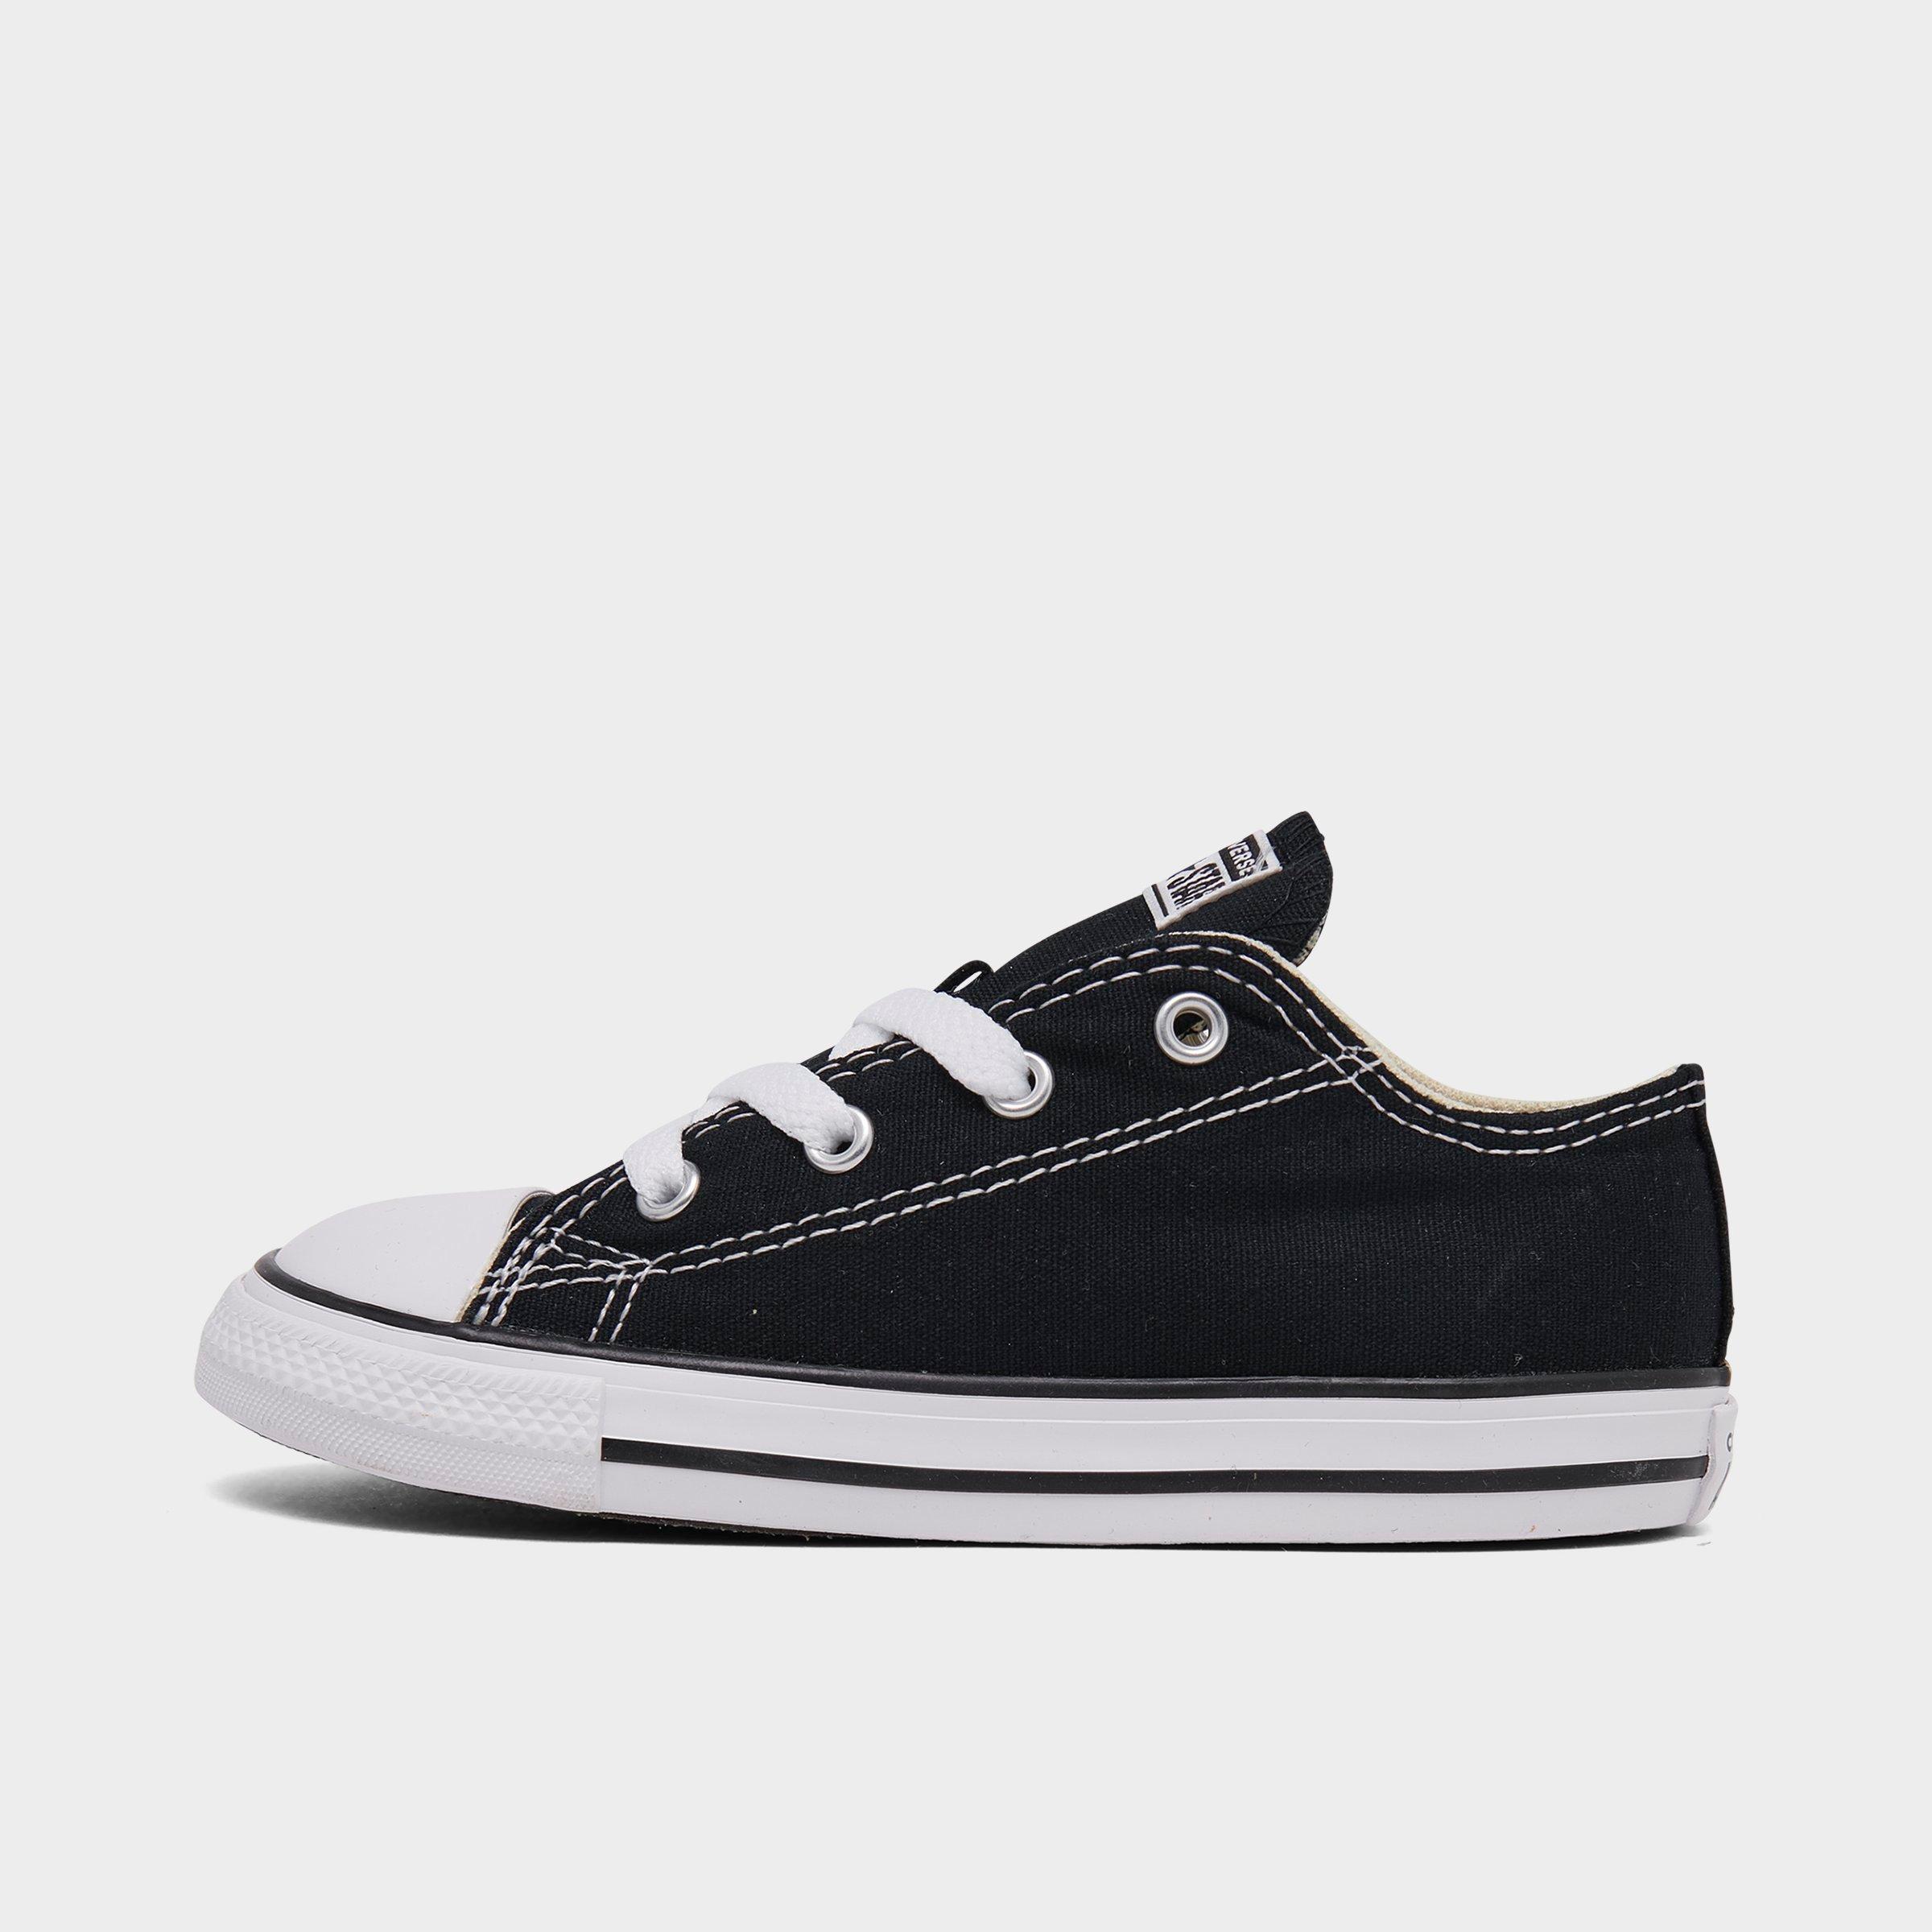 jd sports converse trainers